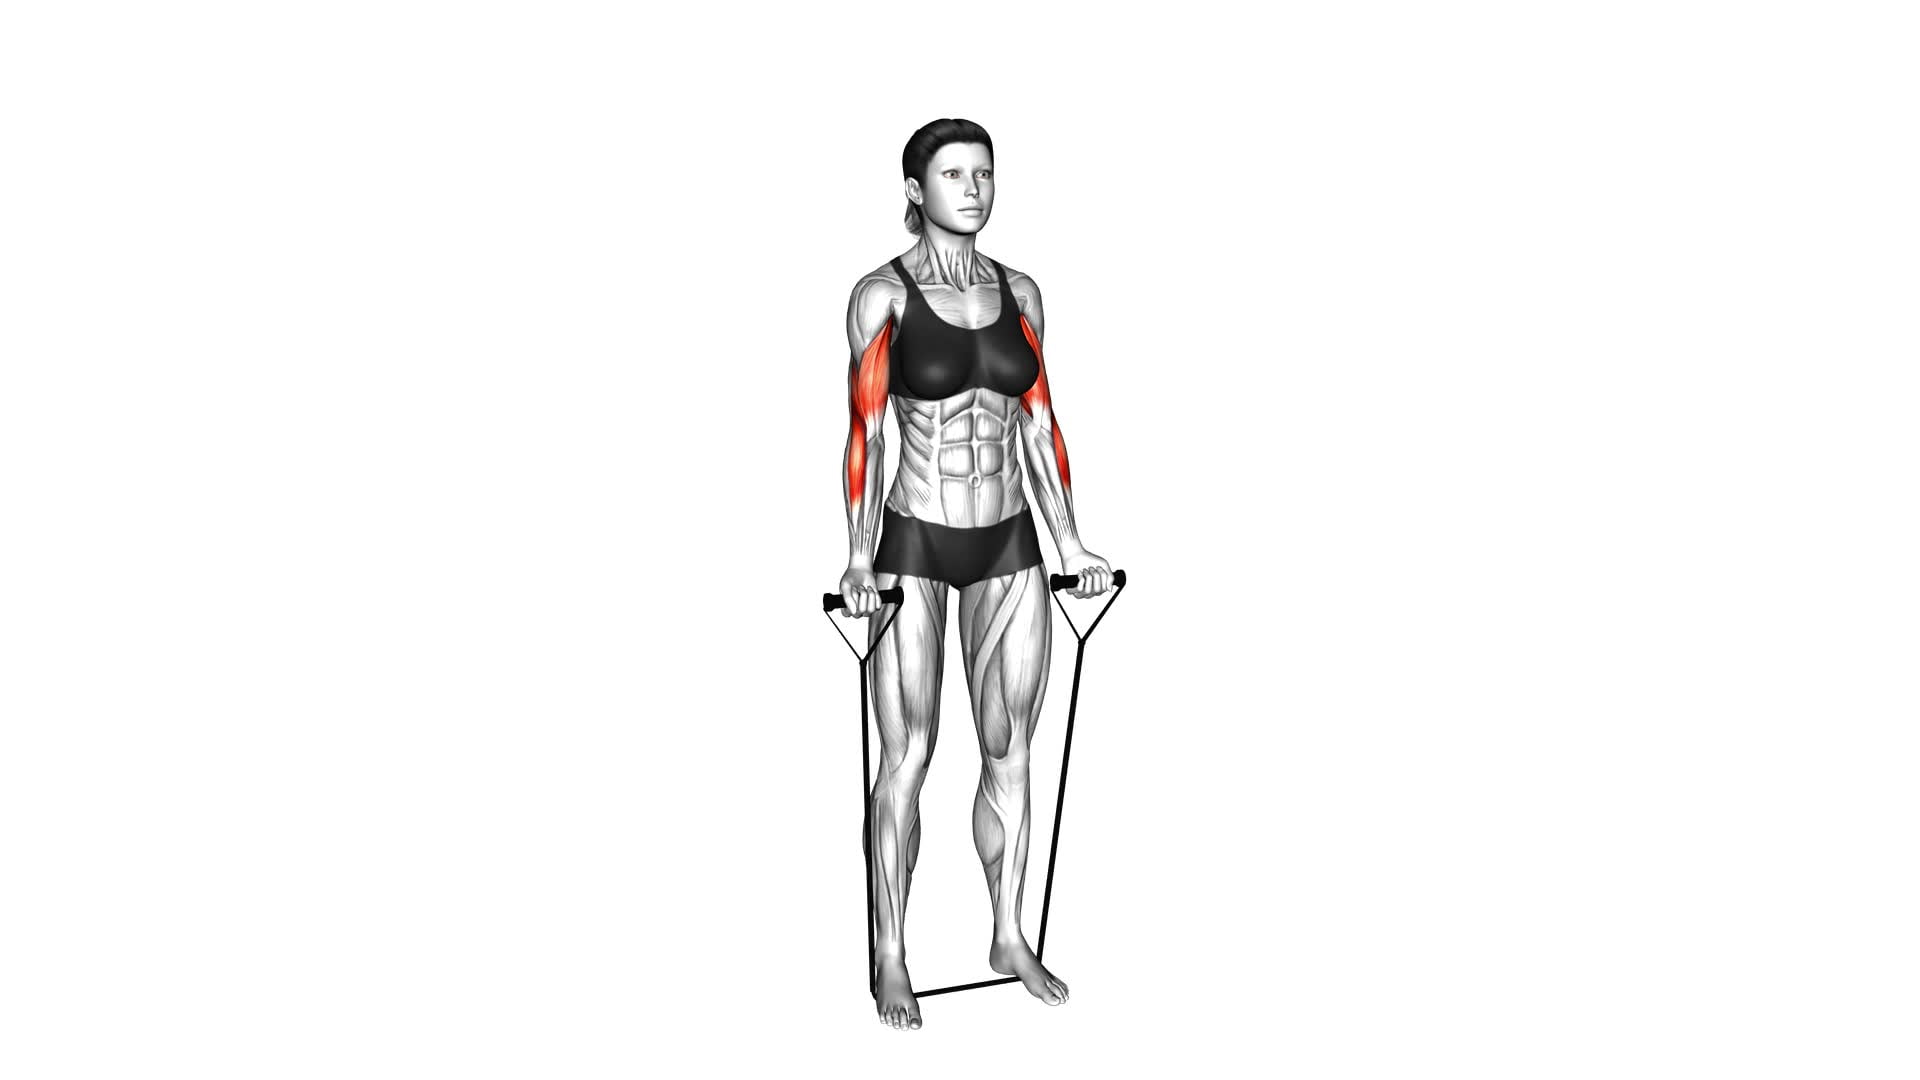 Band Standing Alternate Biceps Curl (female) - Video Exercise Guide & Tips